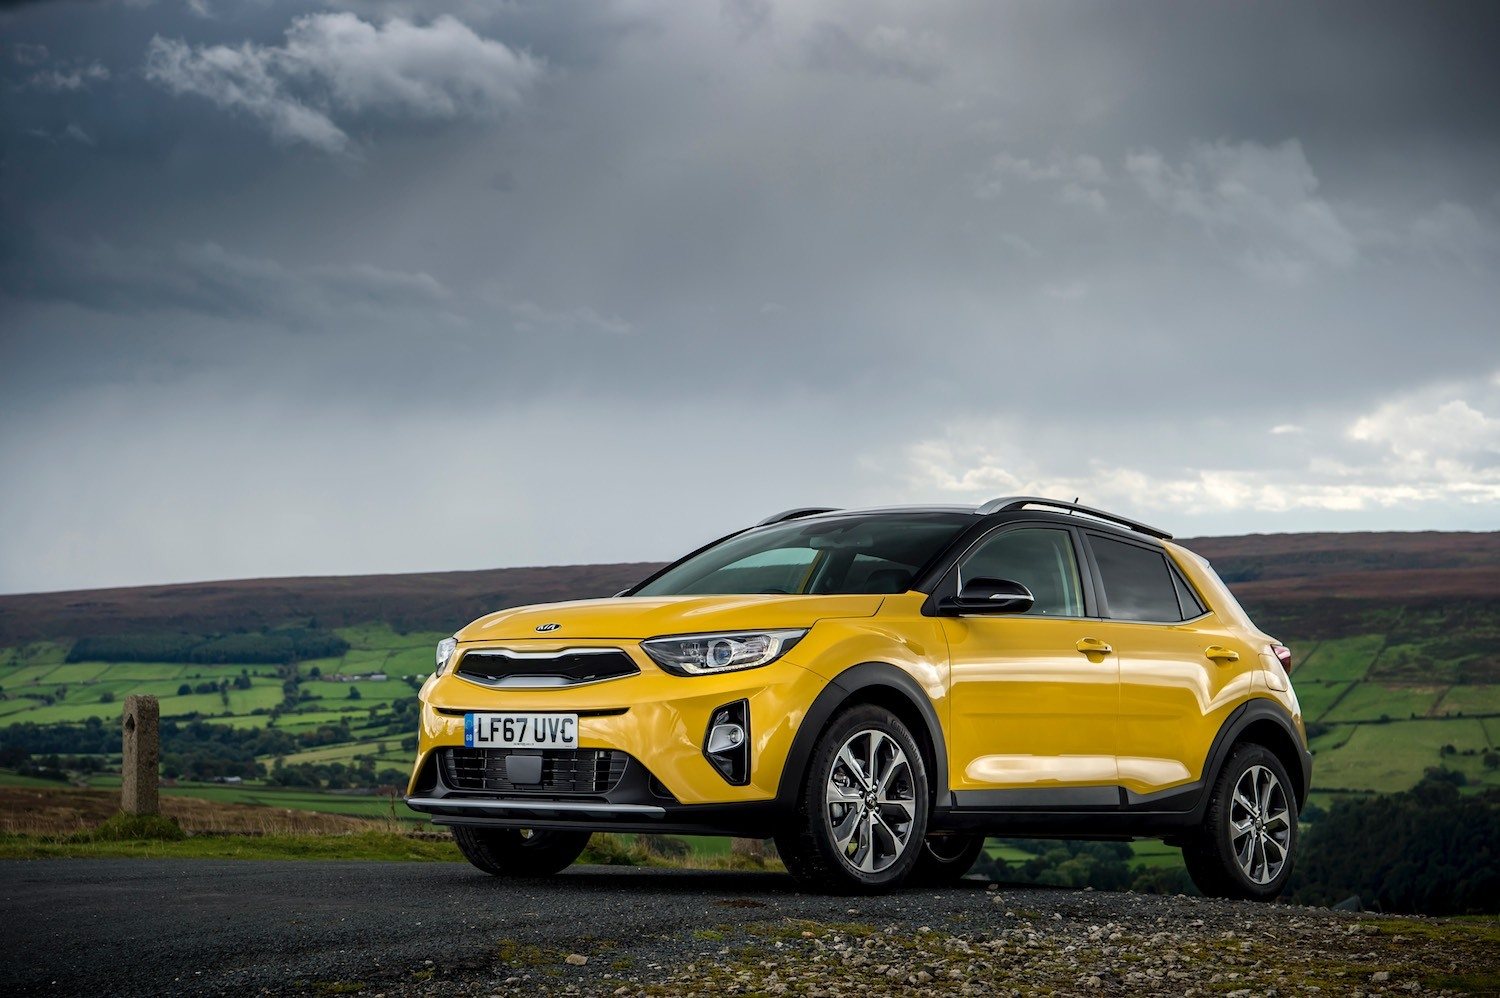 All New Kia Stonic reviewed by Tom Scanlan for Drive 13